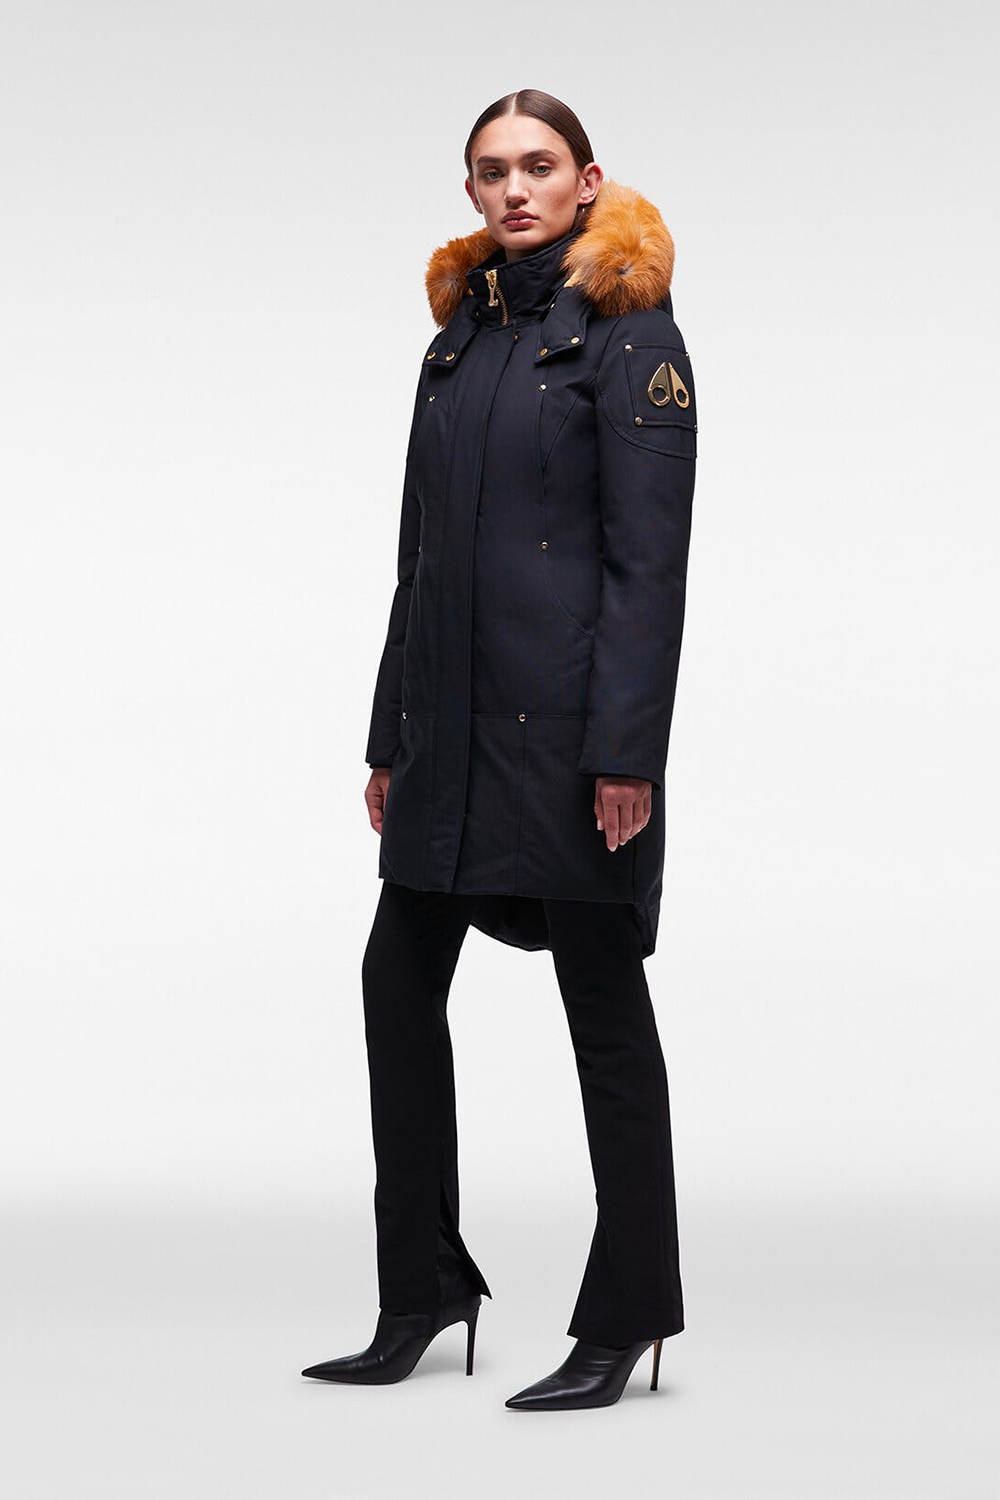 Moose Knuckles Gold Stirling Parka in Navy with Gold Fox Fur